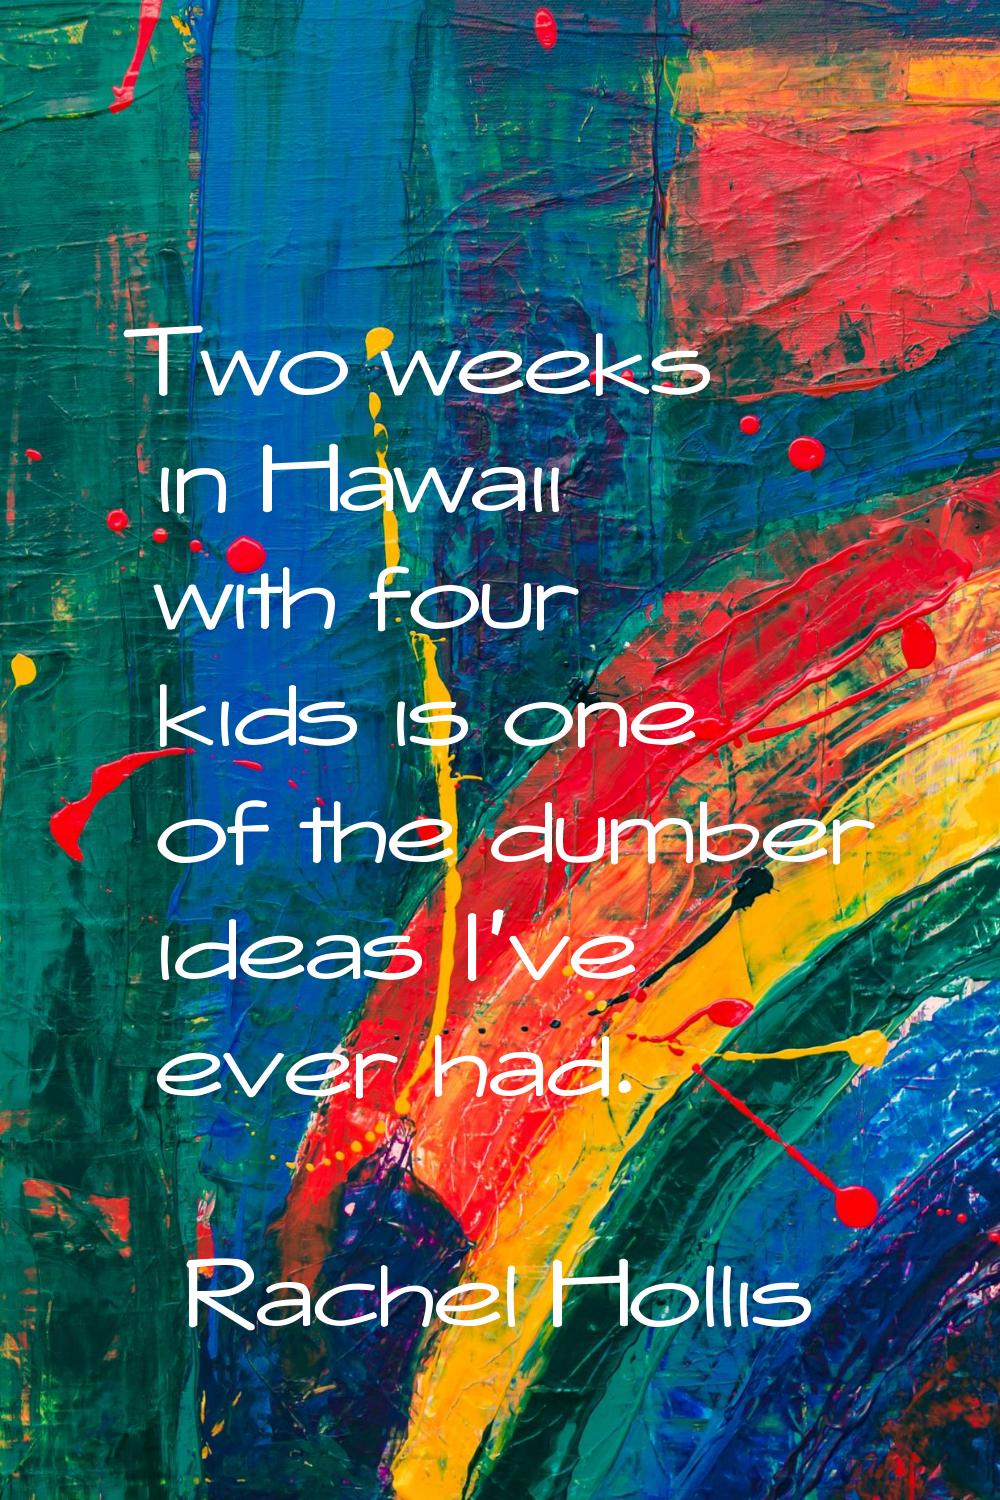 Two weeks in Hawaii with four kids is one of the dumber ideas I've ever had.